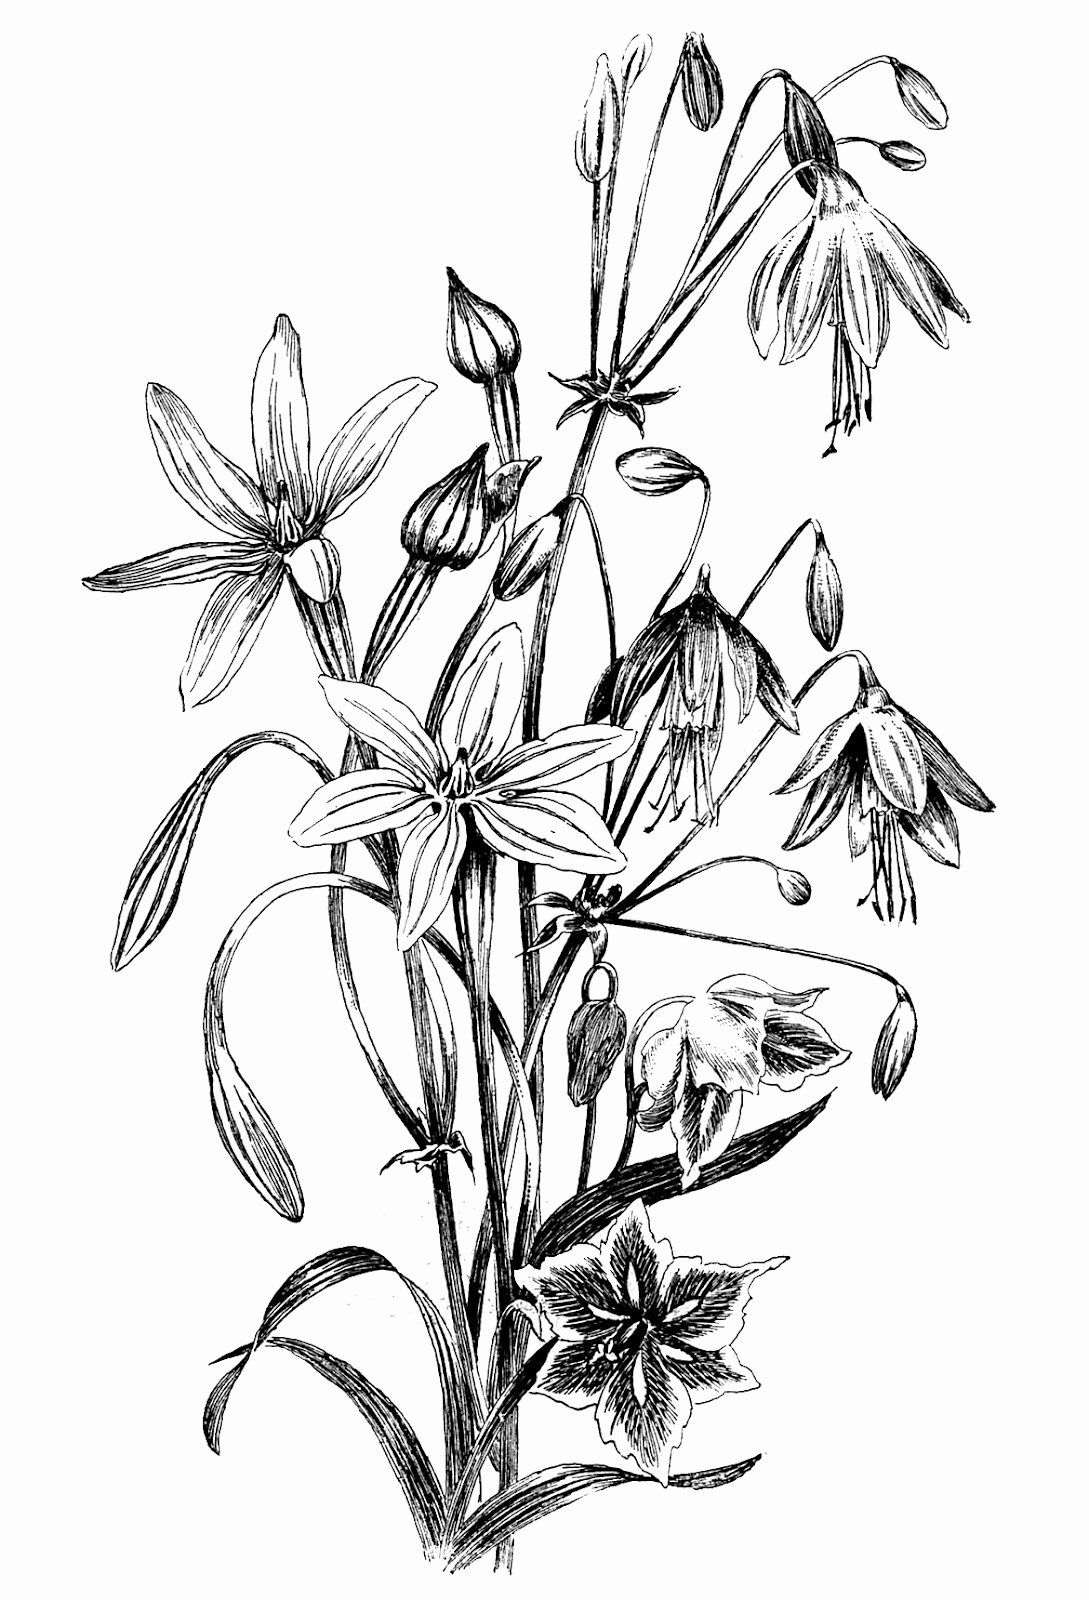 Black and White Flower Drawings Luxury Free Drawings Flowers In Black and White Download Free Clip Art Free Clip Art On Clipart